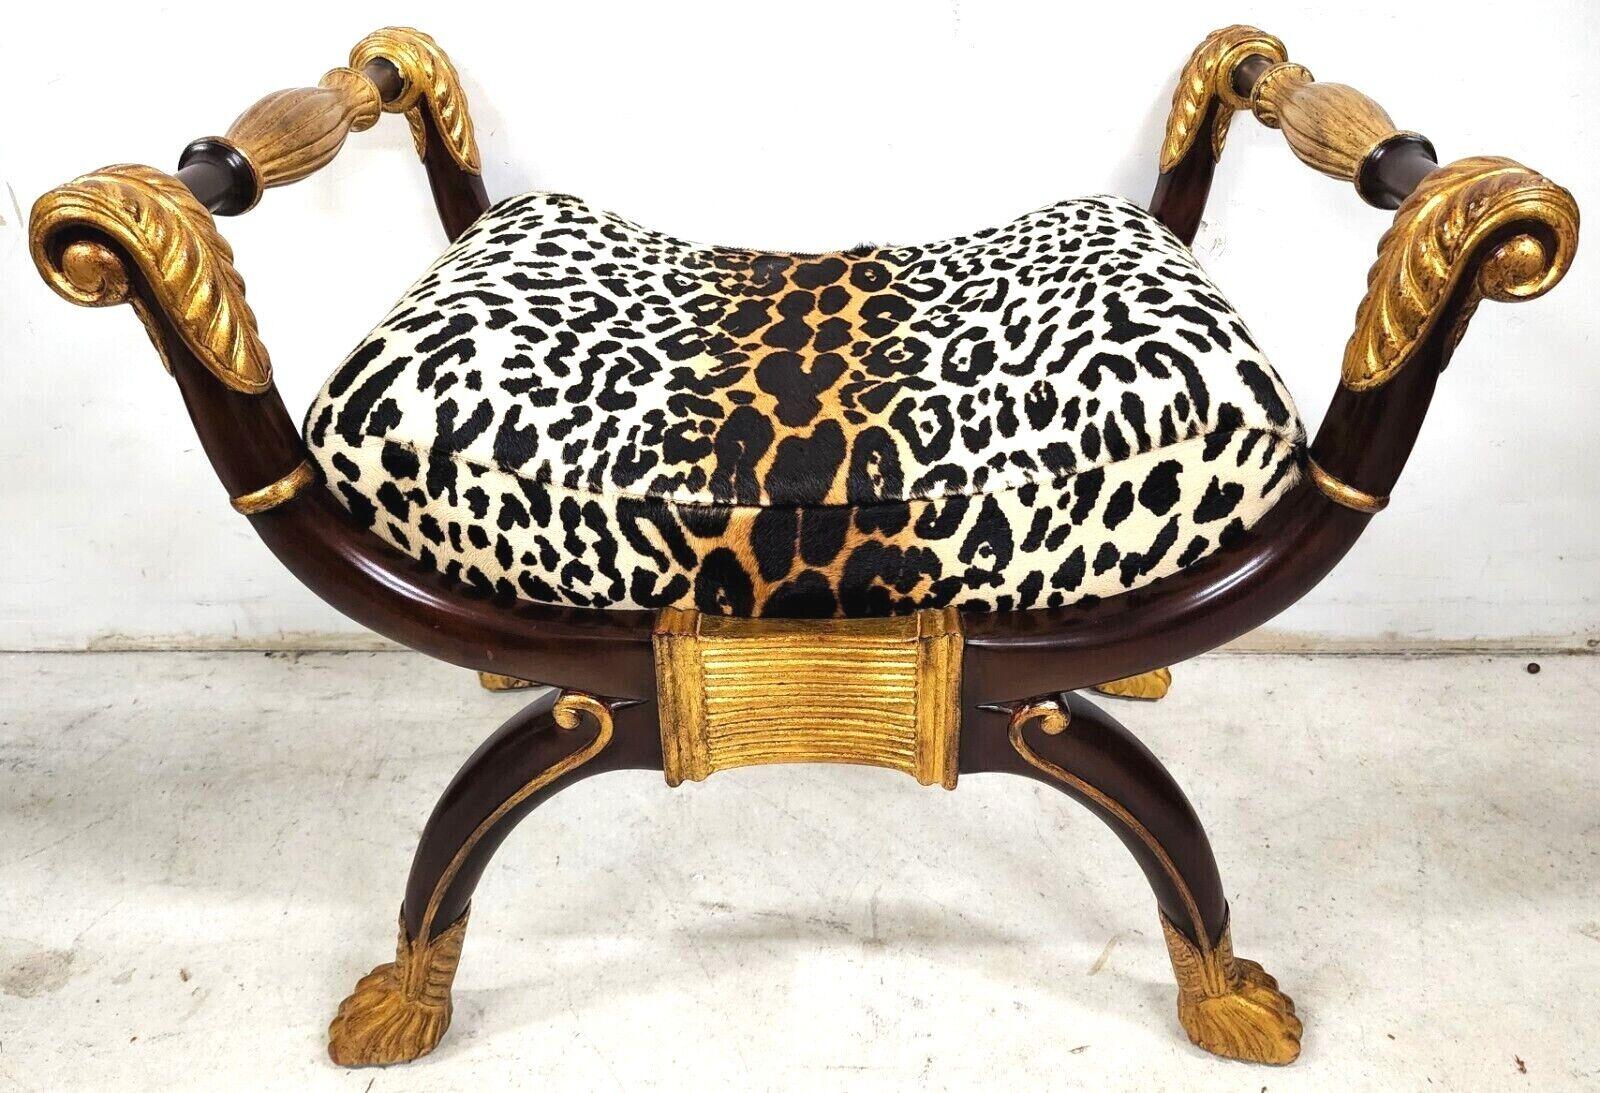 Offering one of our recent palm beach estate fine furniture acquisitions of a
Vintage French Neoclassical Faux leopard gilded bench by Maitland Smith
Fabric is very plush and soft.

Approximate measurements in inches
26